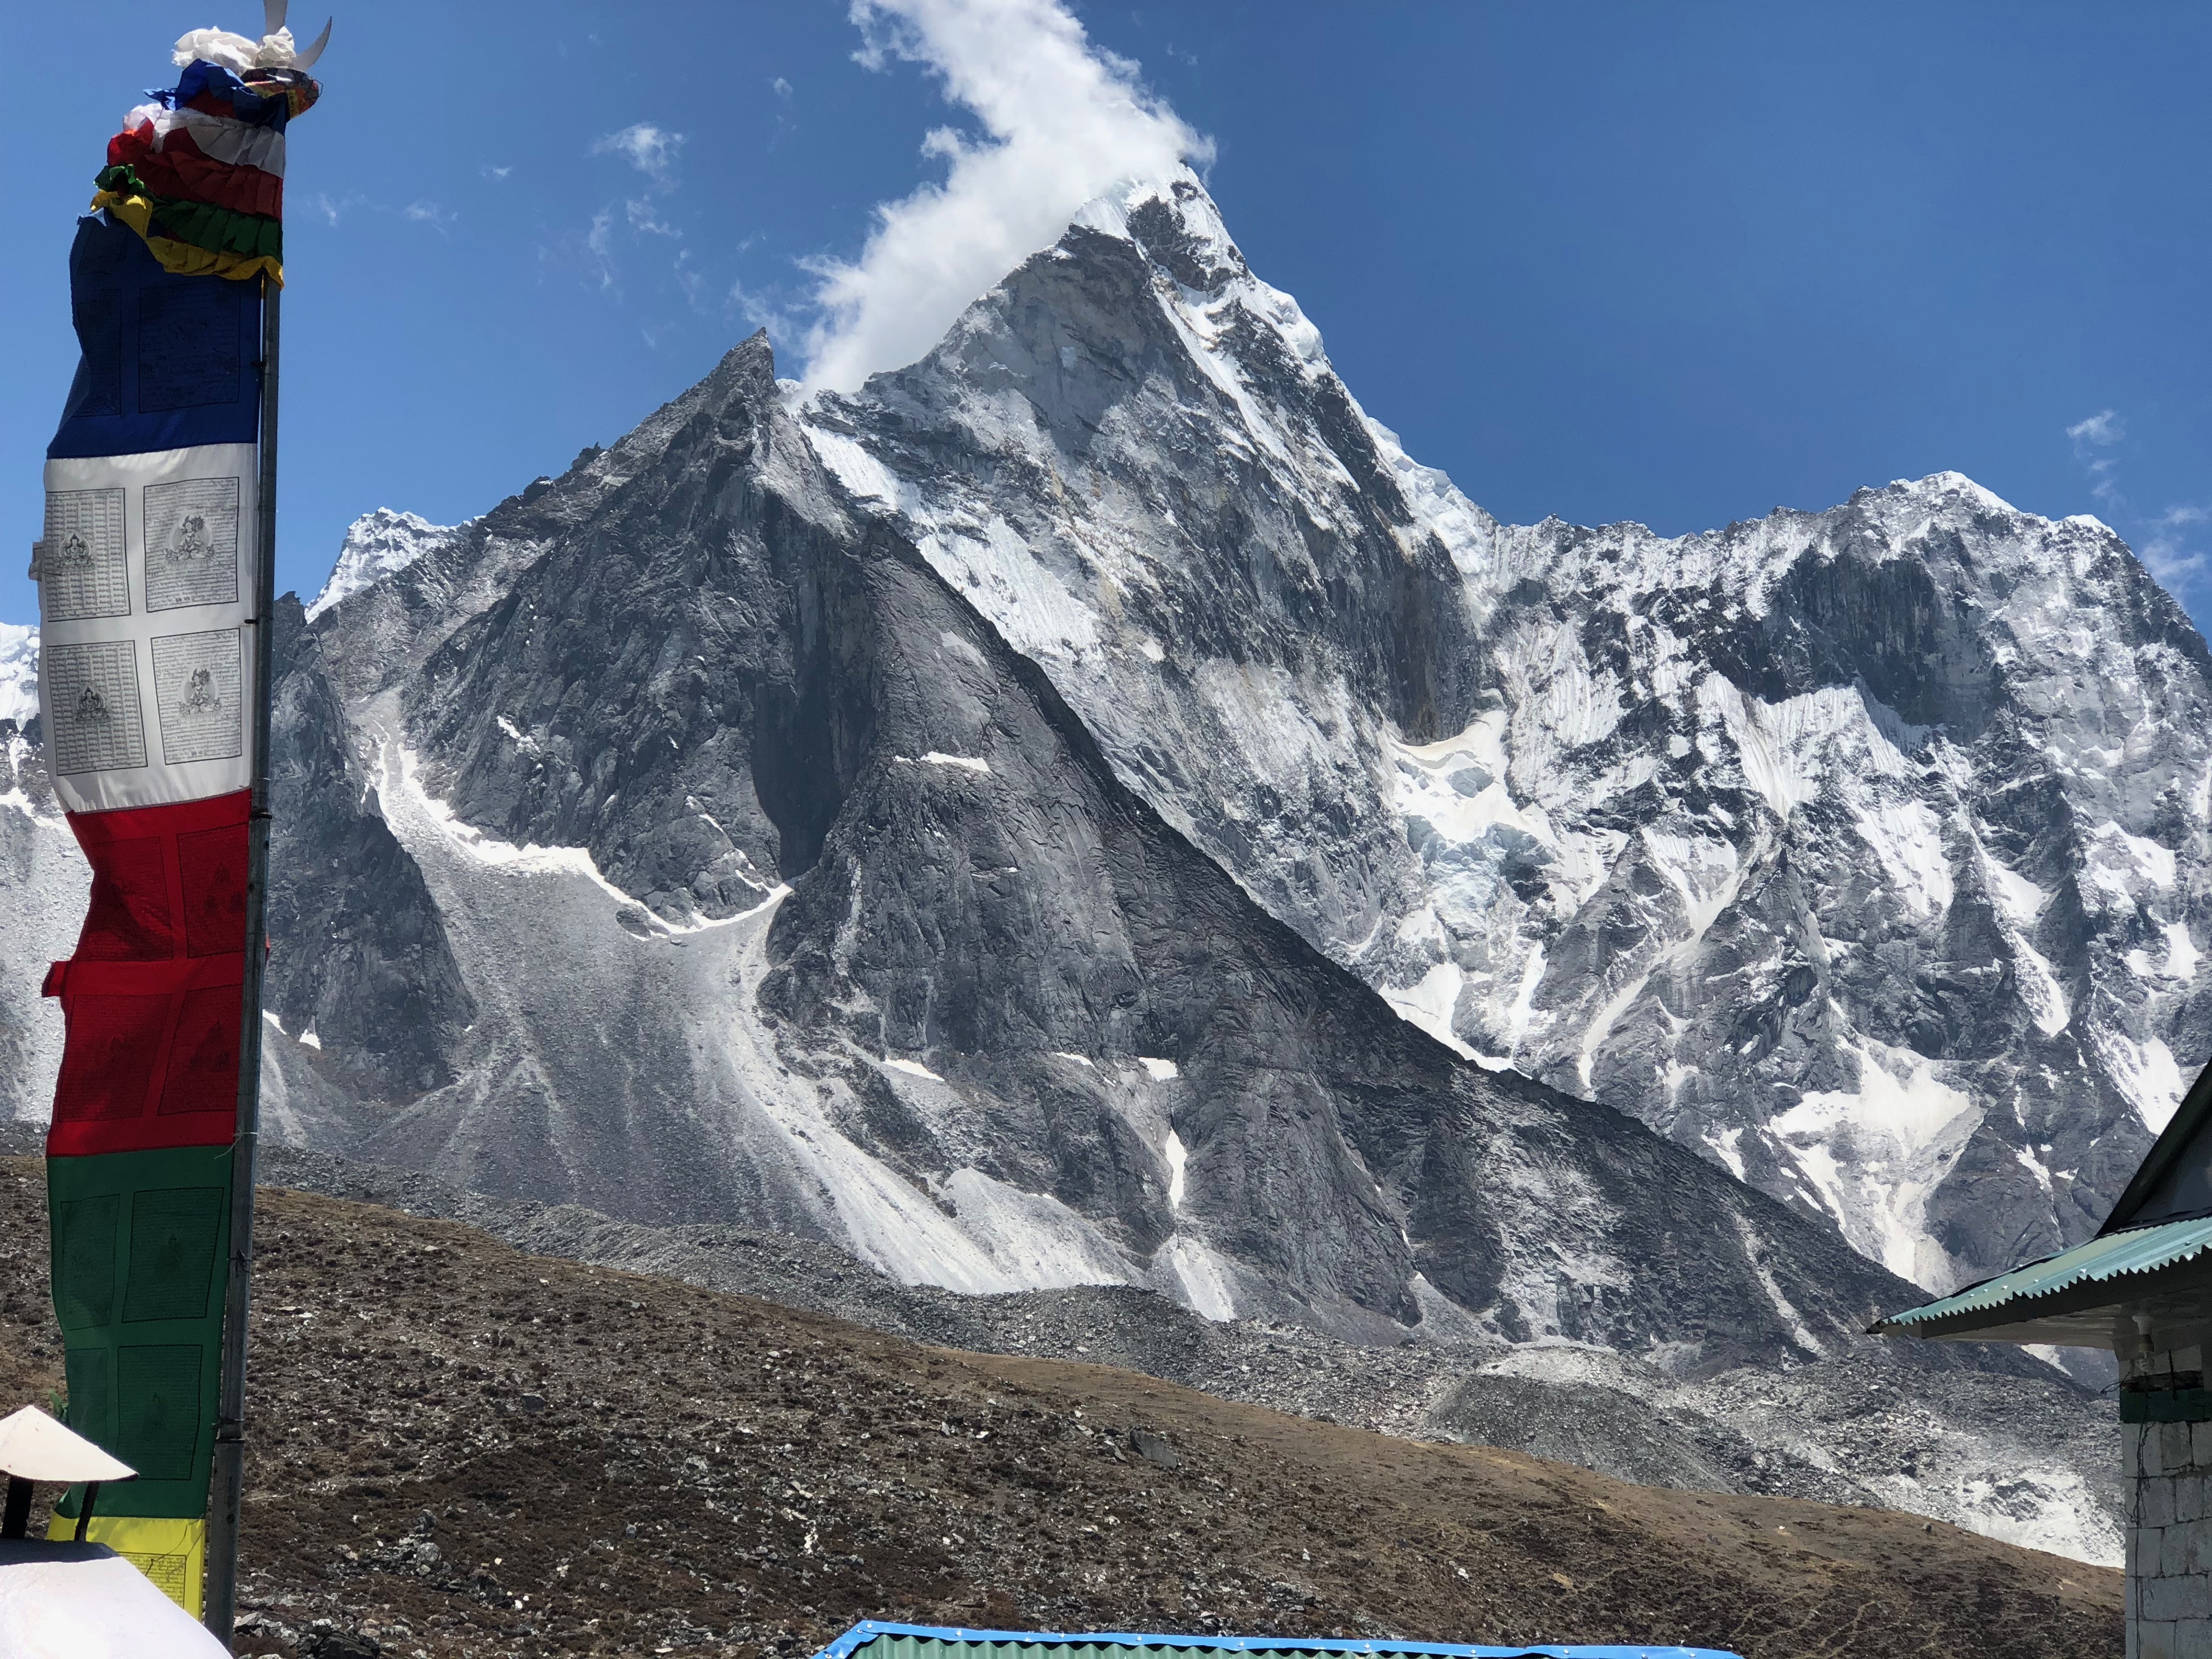 The view of Ama Dablam from Chuckung